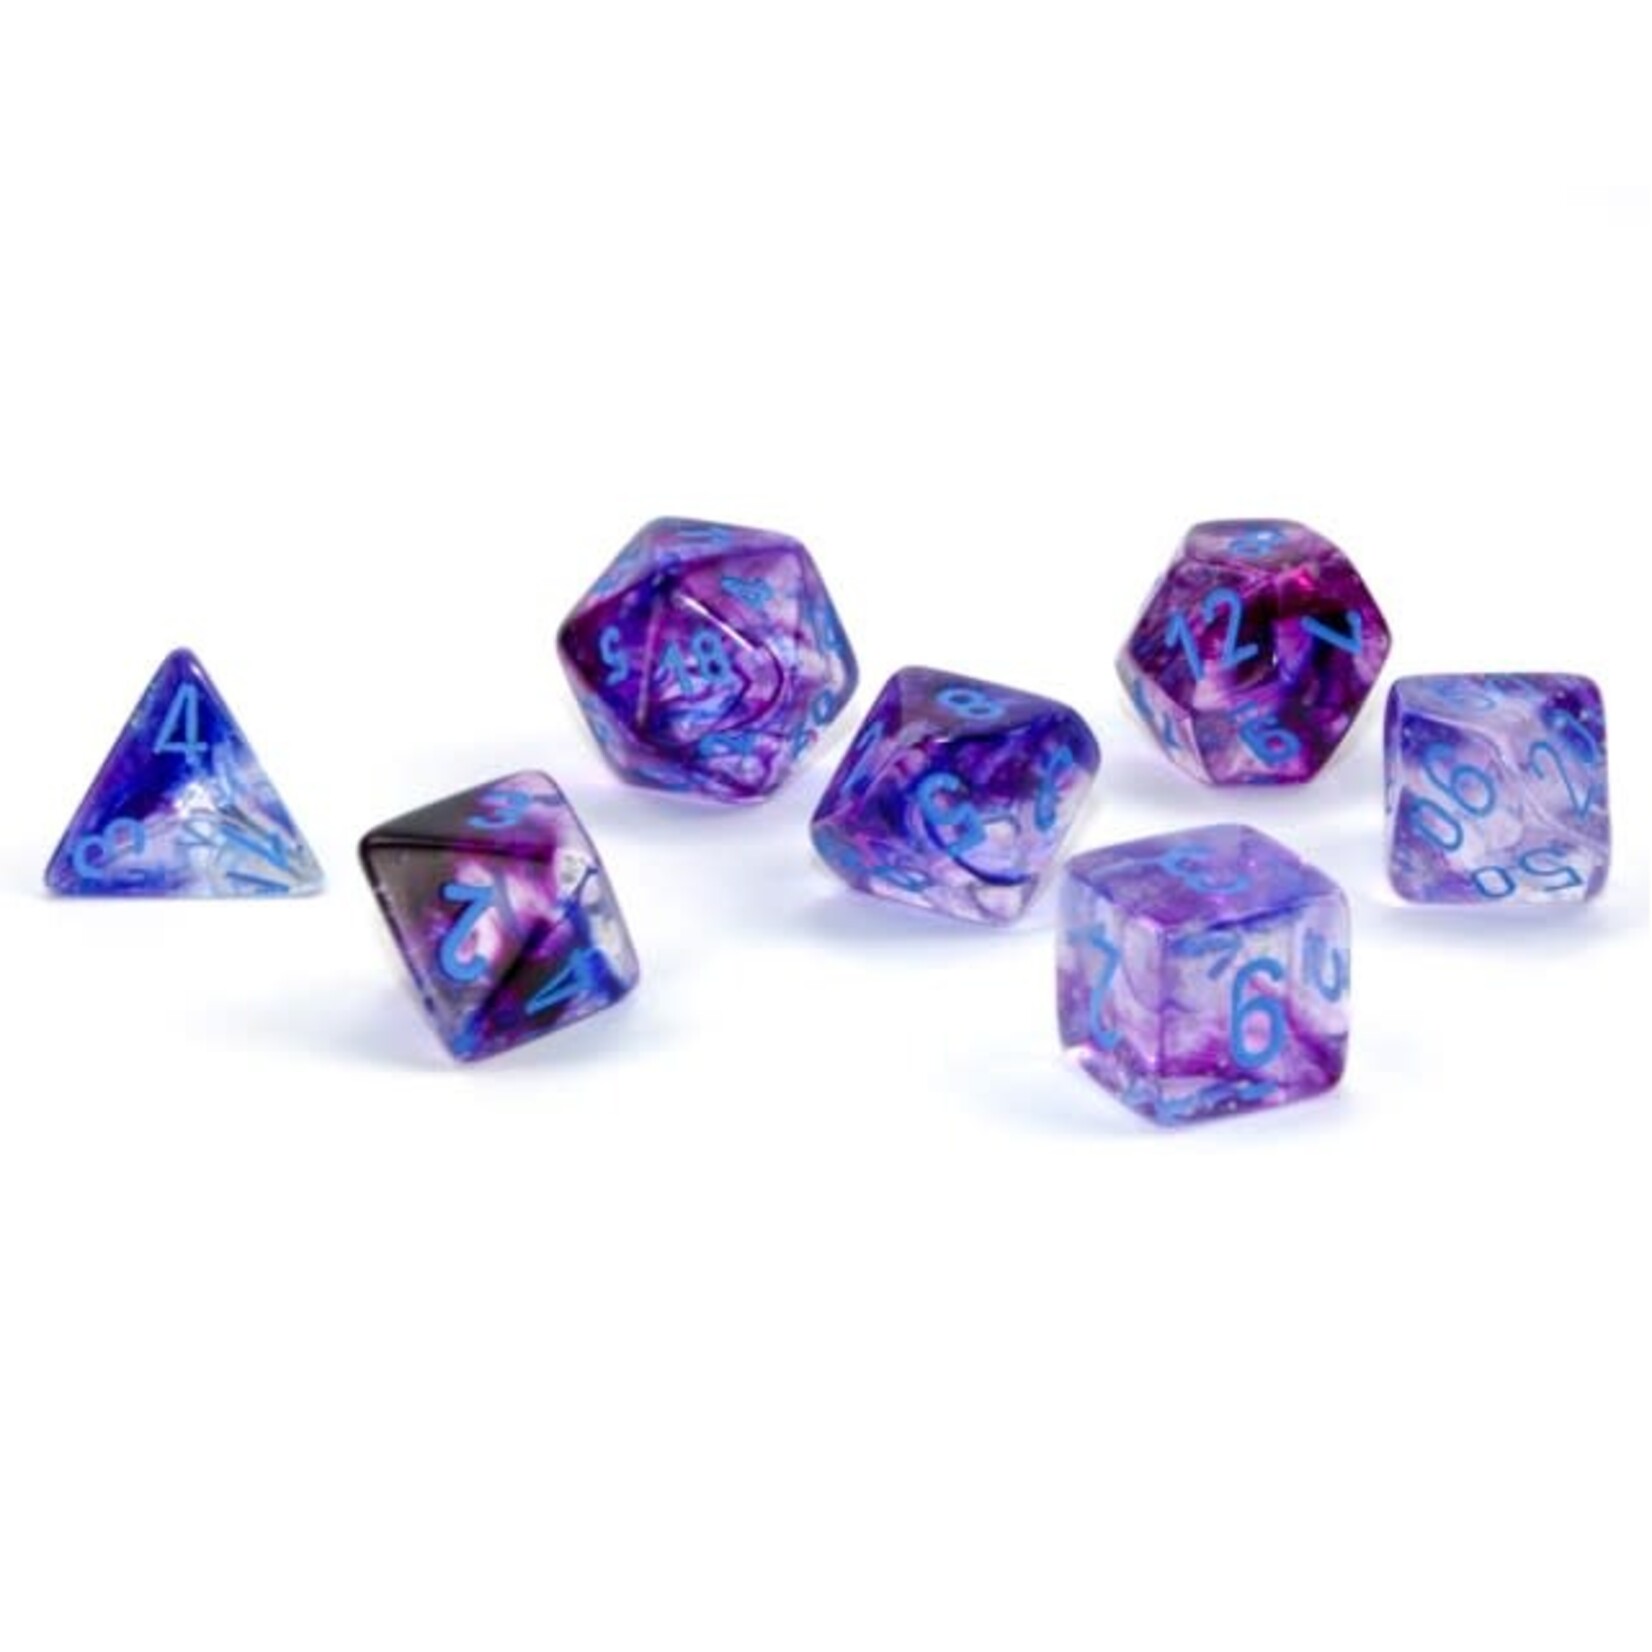 Chessex Polyhedral 7-Die Set: Nebula Nocturnal with blue